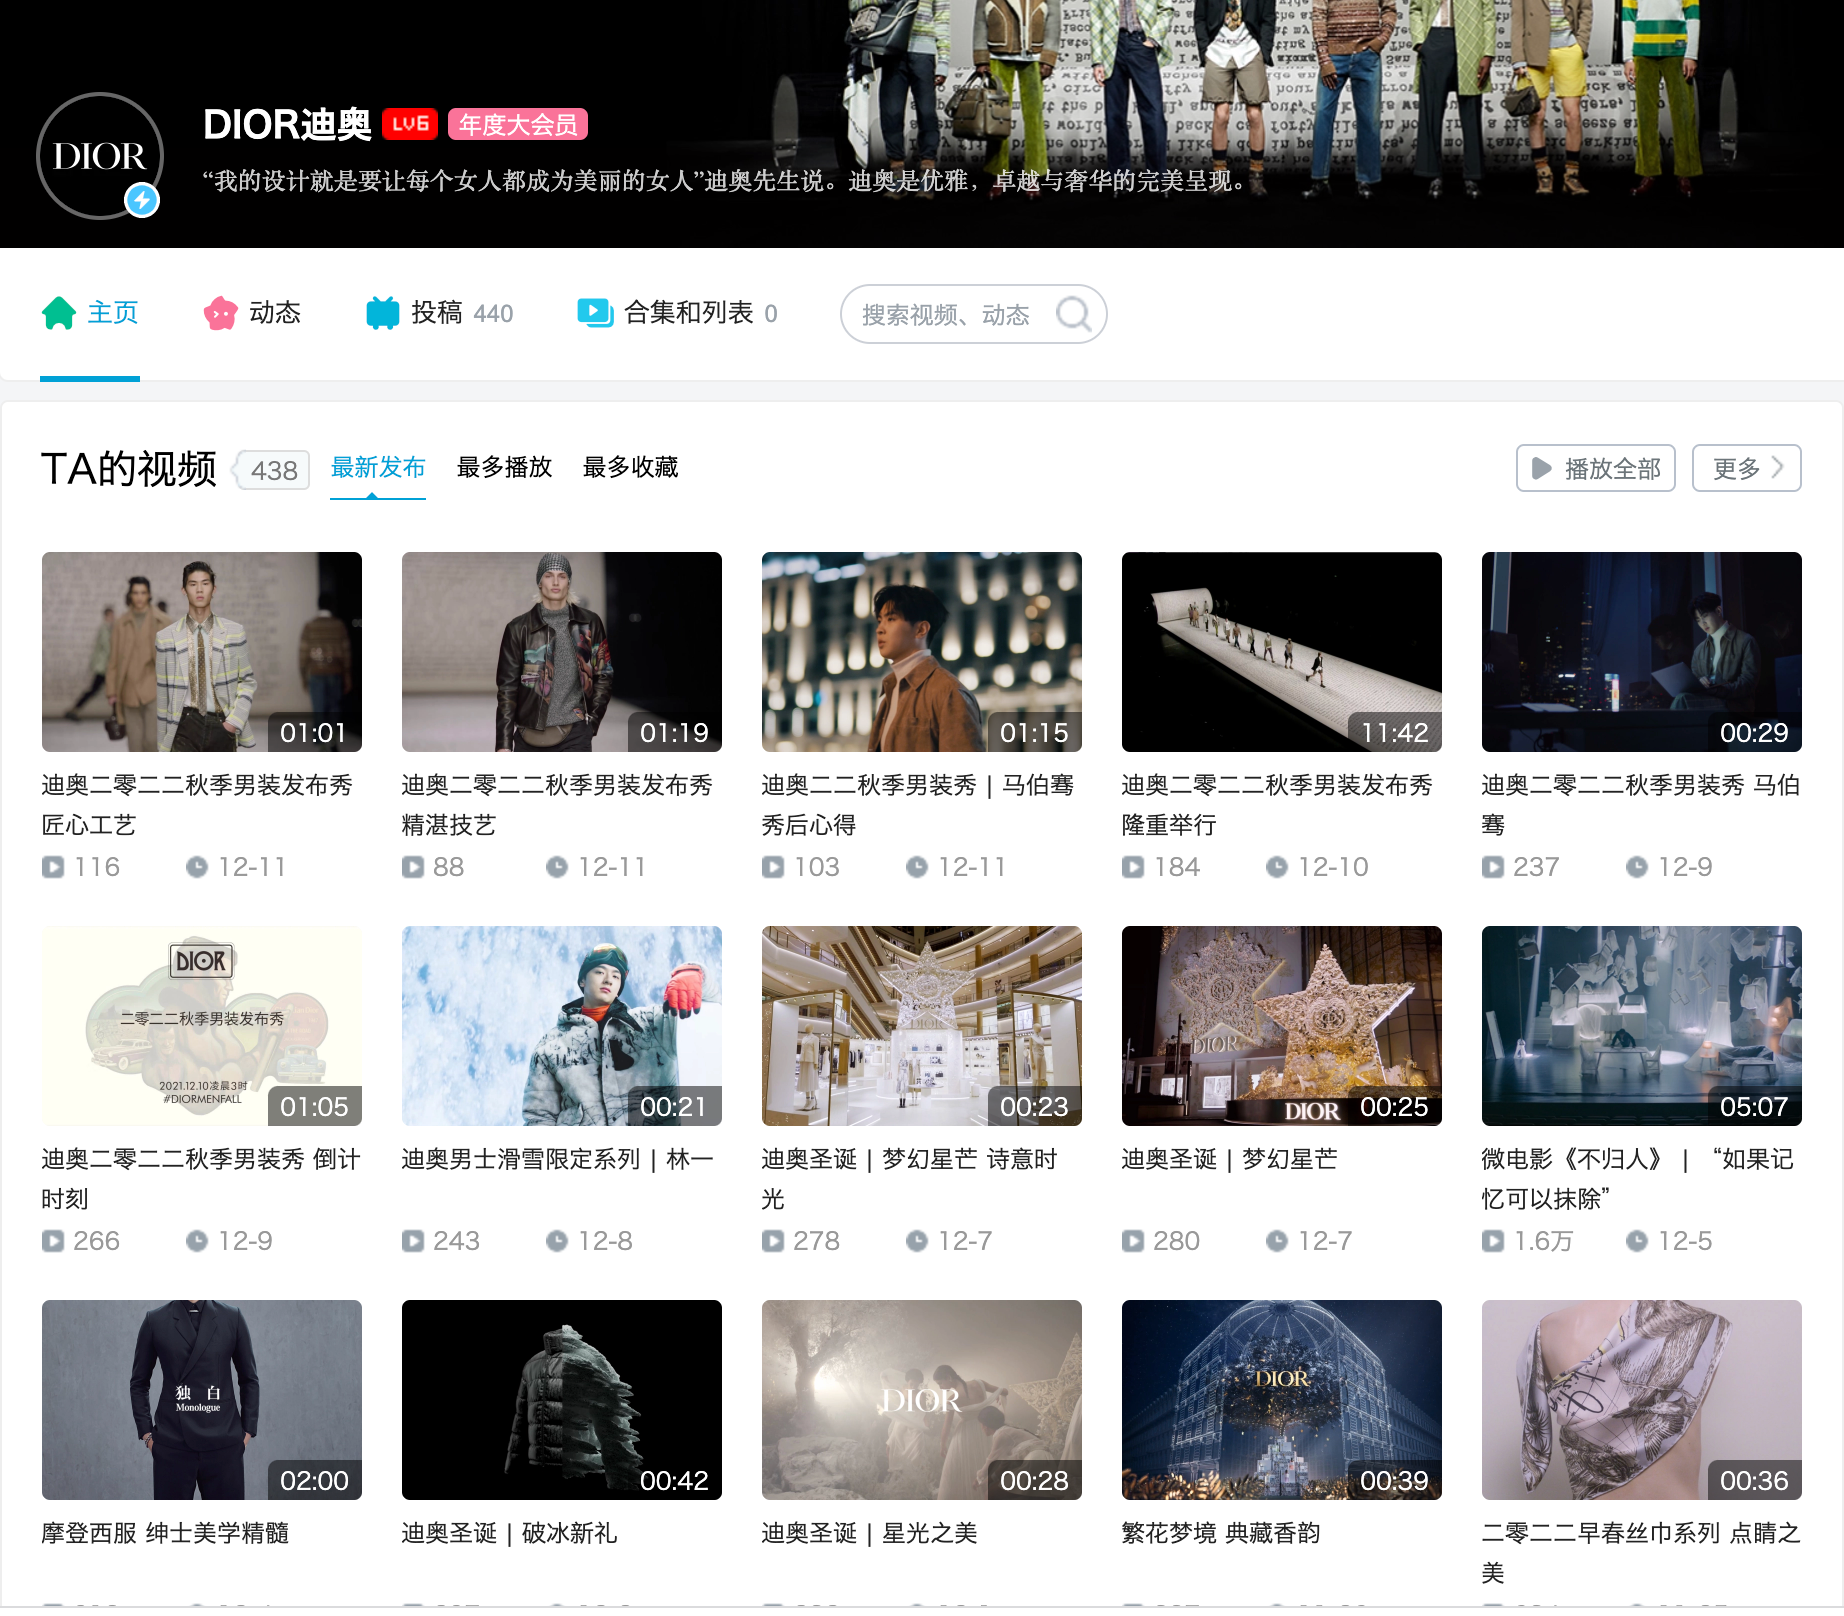 Bilibili's young user base has attracted brands like Dior to launch official accounts. Photo: Bilibili